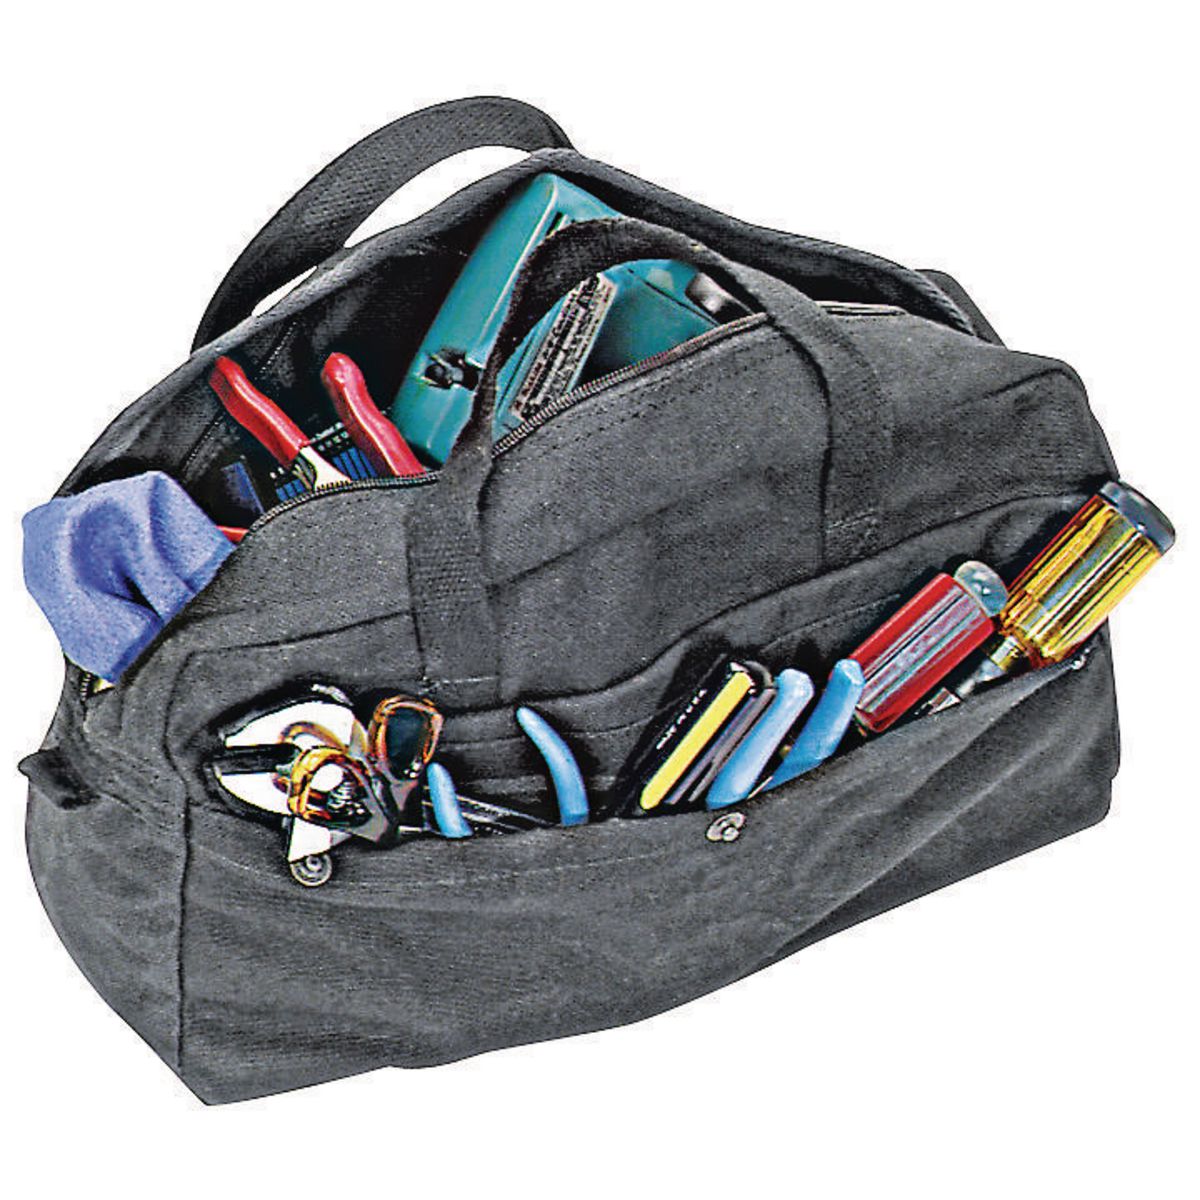 VOYAGER 15 In. Canvas Tool Bag - Item 32282